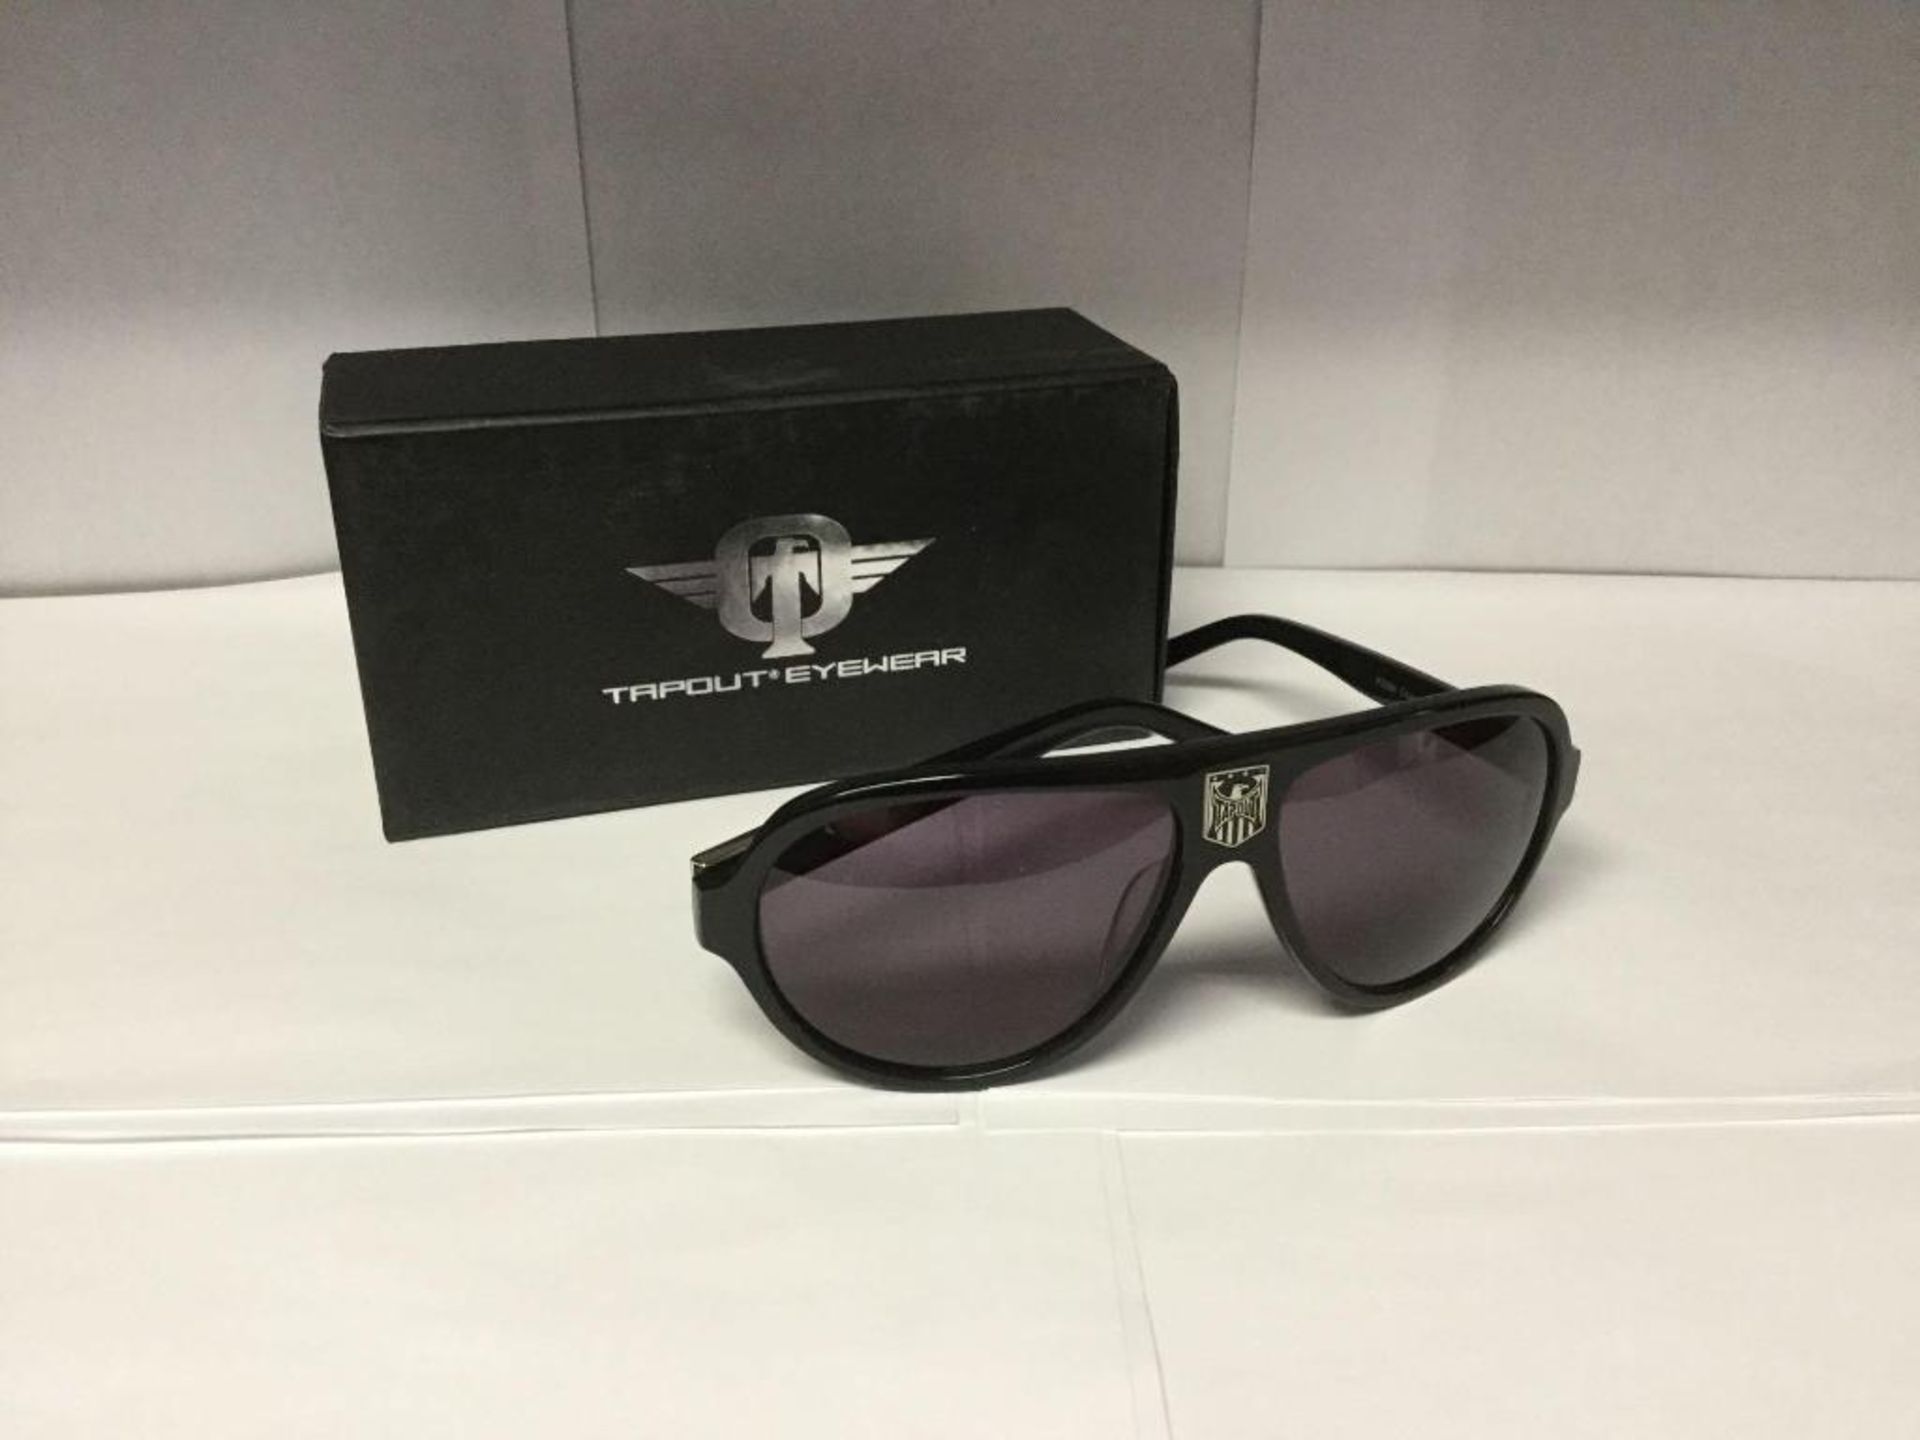 Tapout Eyewear Sunglasses with box and bag